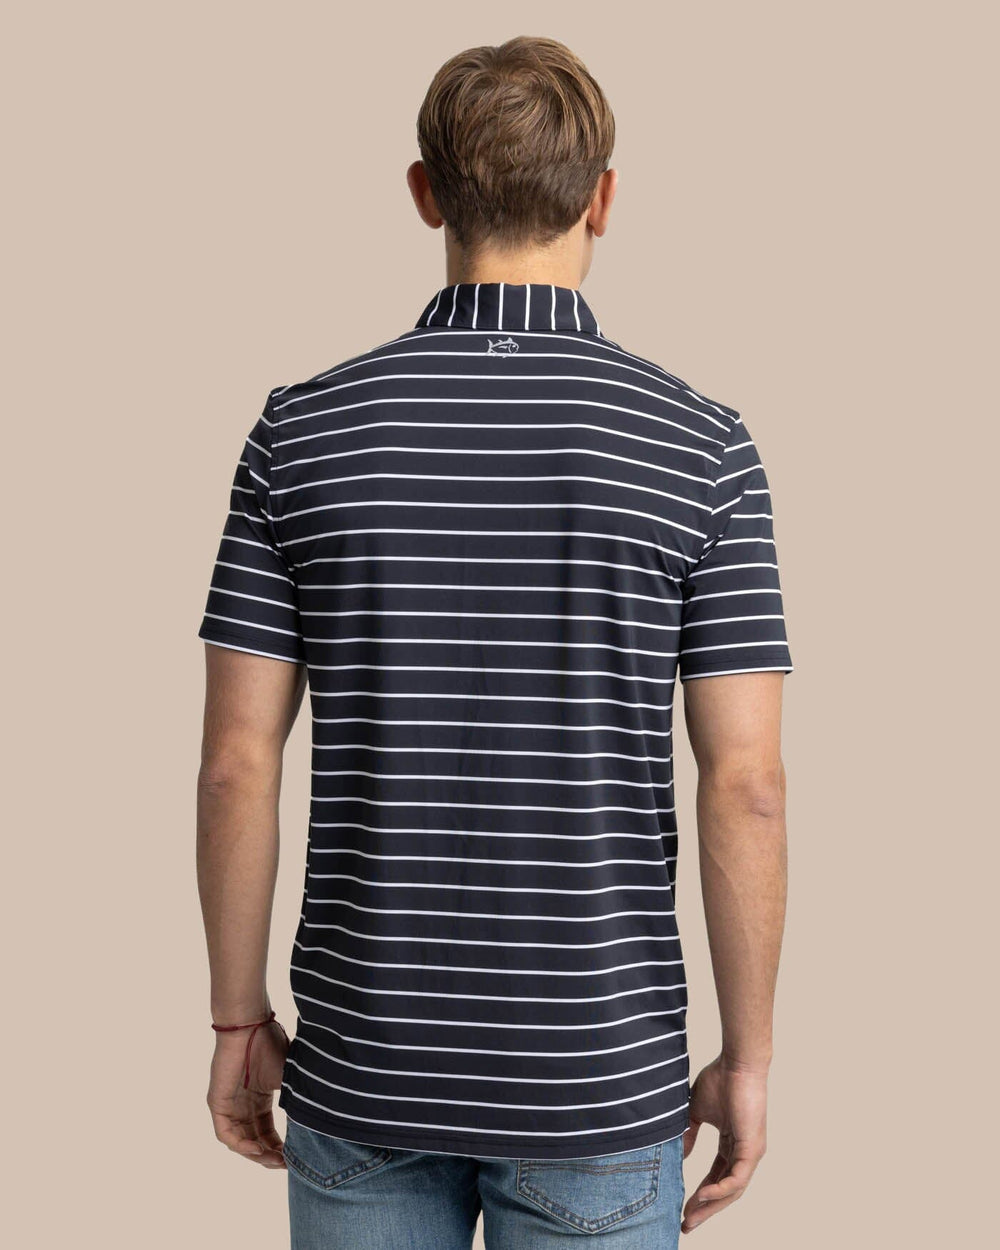 The back view of the Southern Tide brrr-eeze Desmond Stripe Performance Polo by Southern Tide - Black